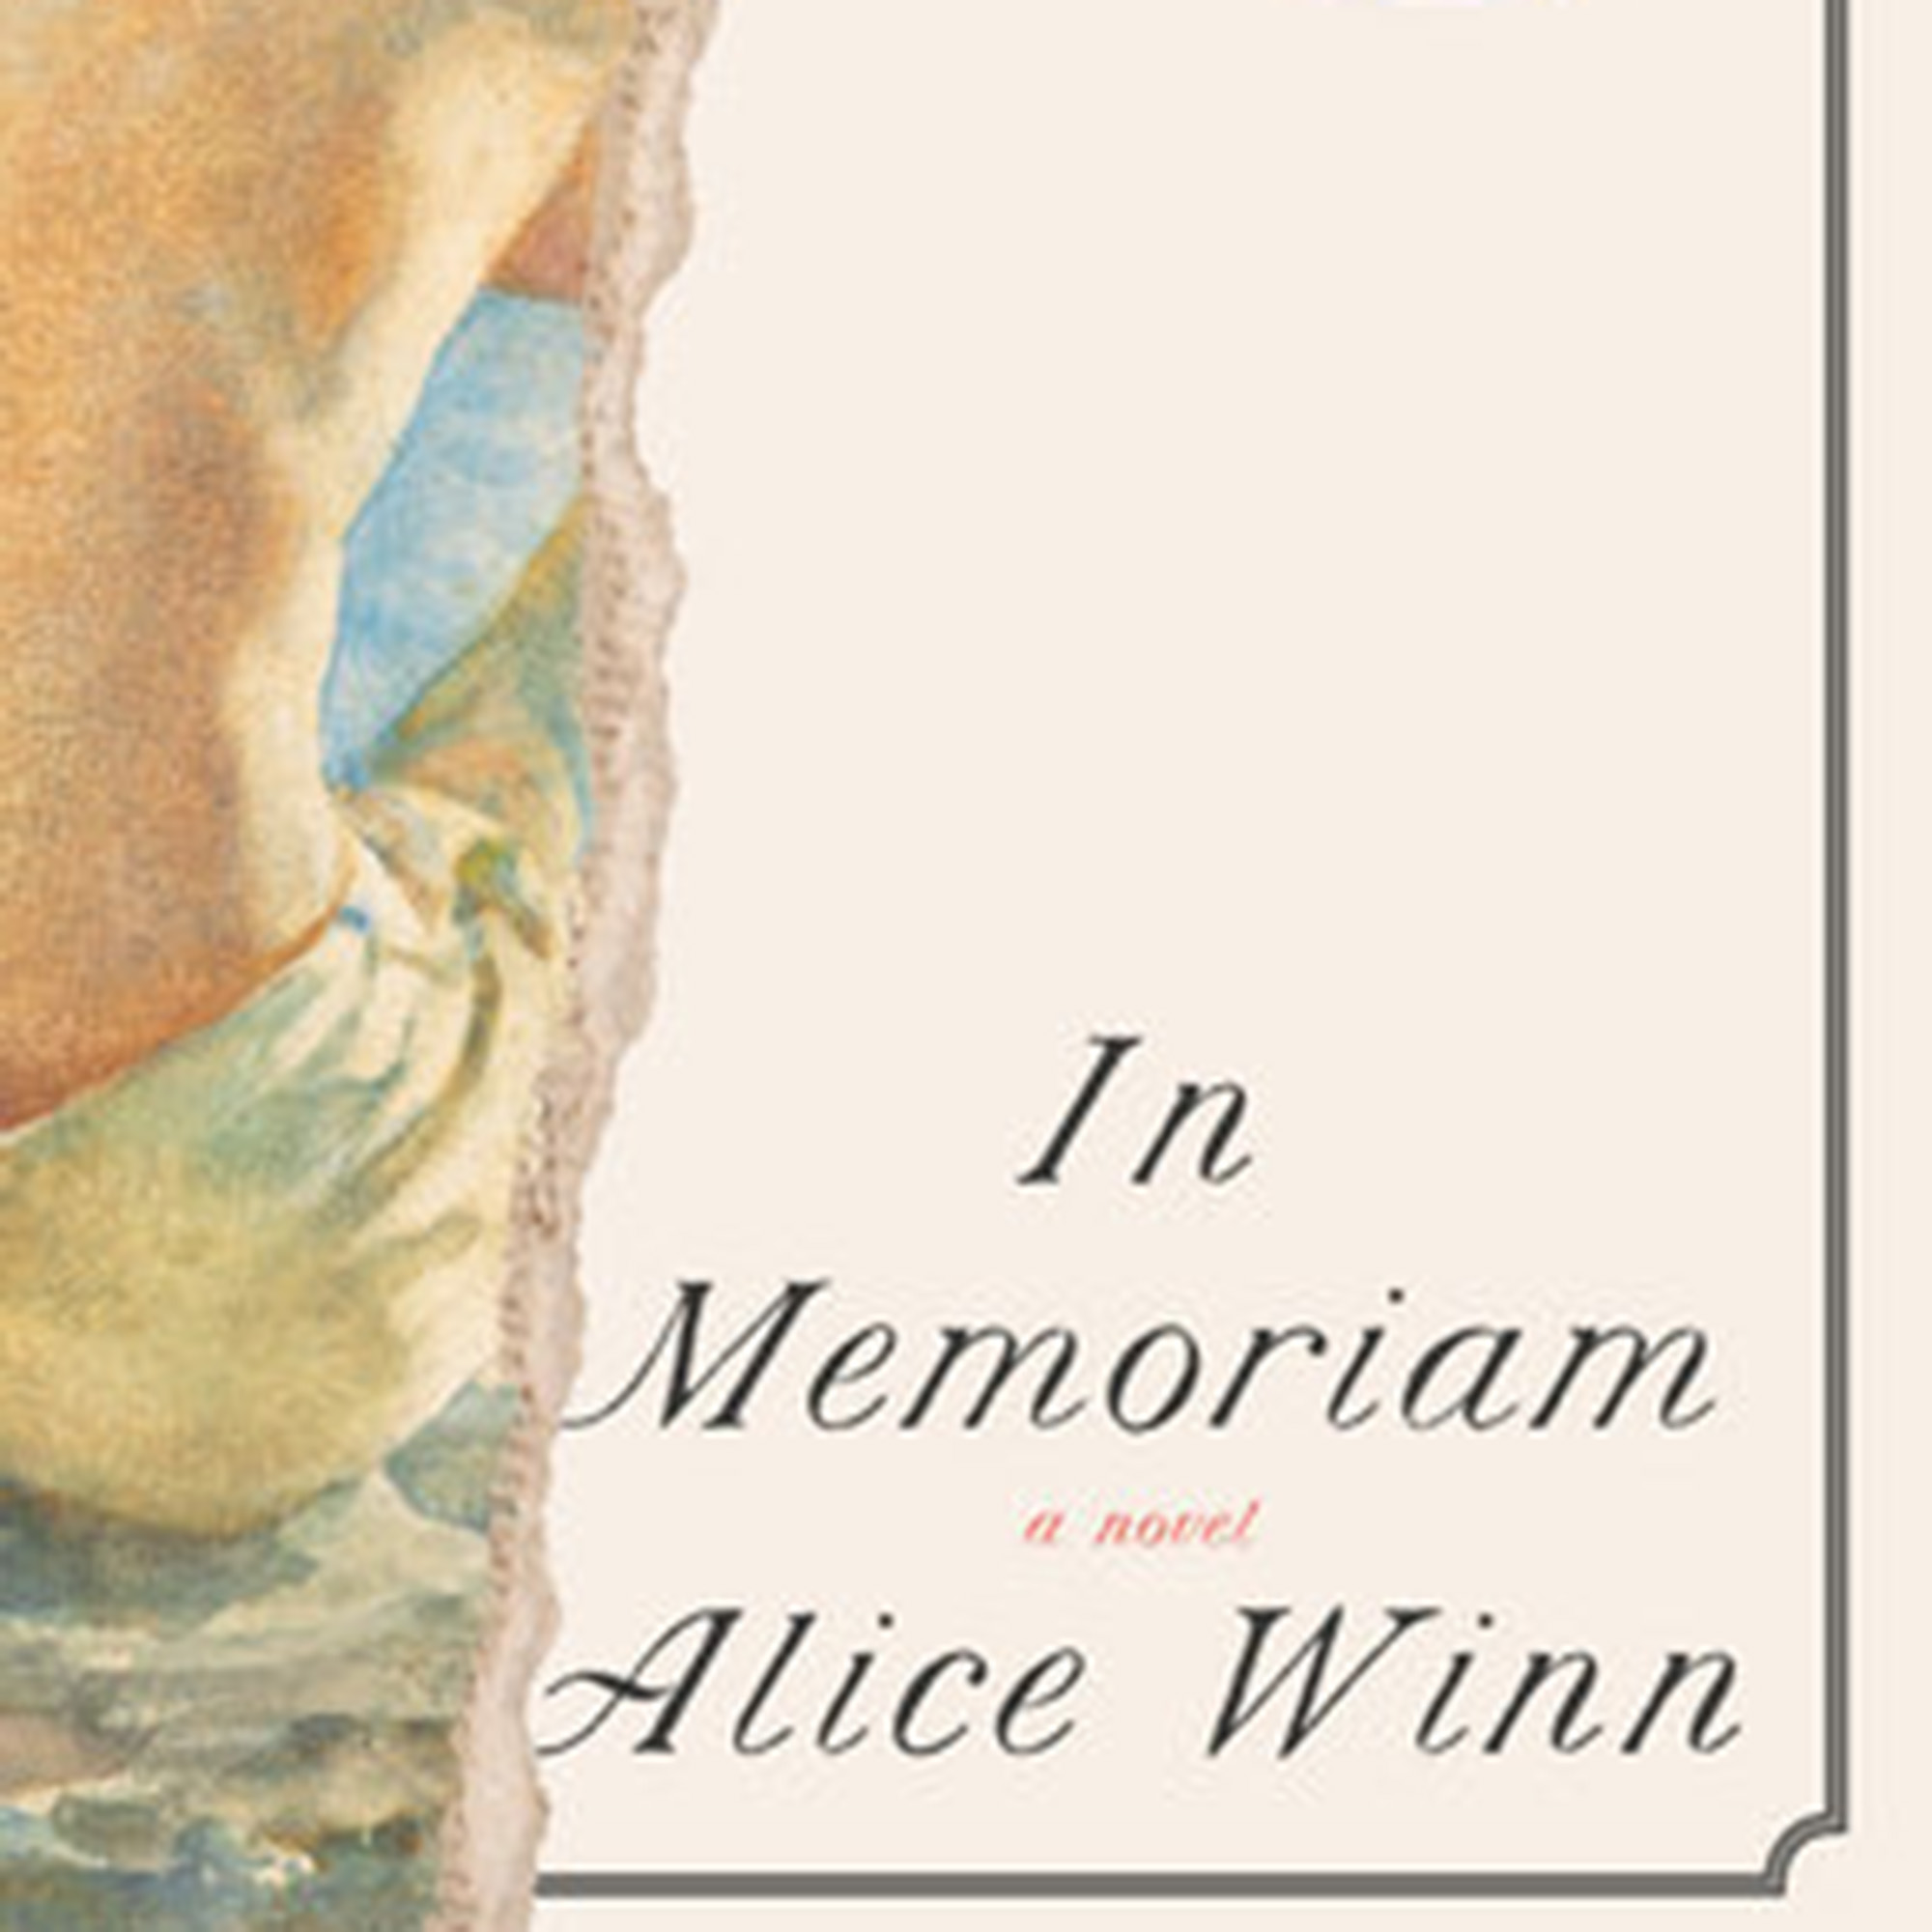 Photo: The book cover of Alice Winn's novel "In Memoriam." To the left is a watercolor painting of a man sitting in front of the water. To the right are the words "In Memoriam a novel Alive Winn"